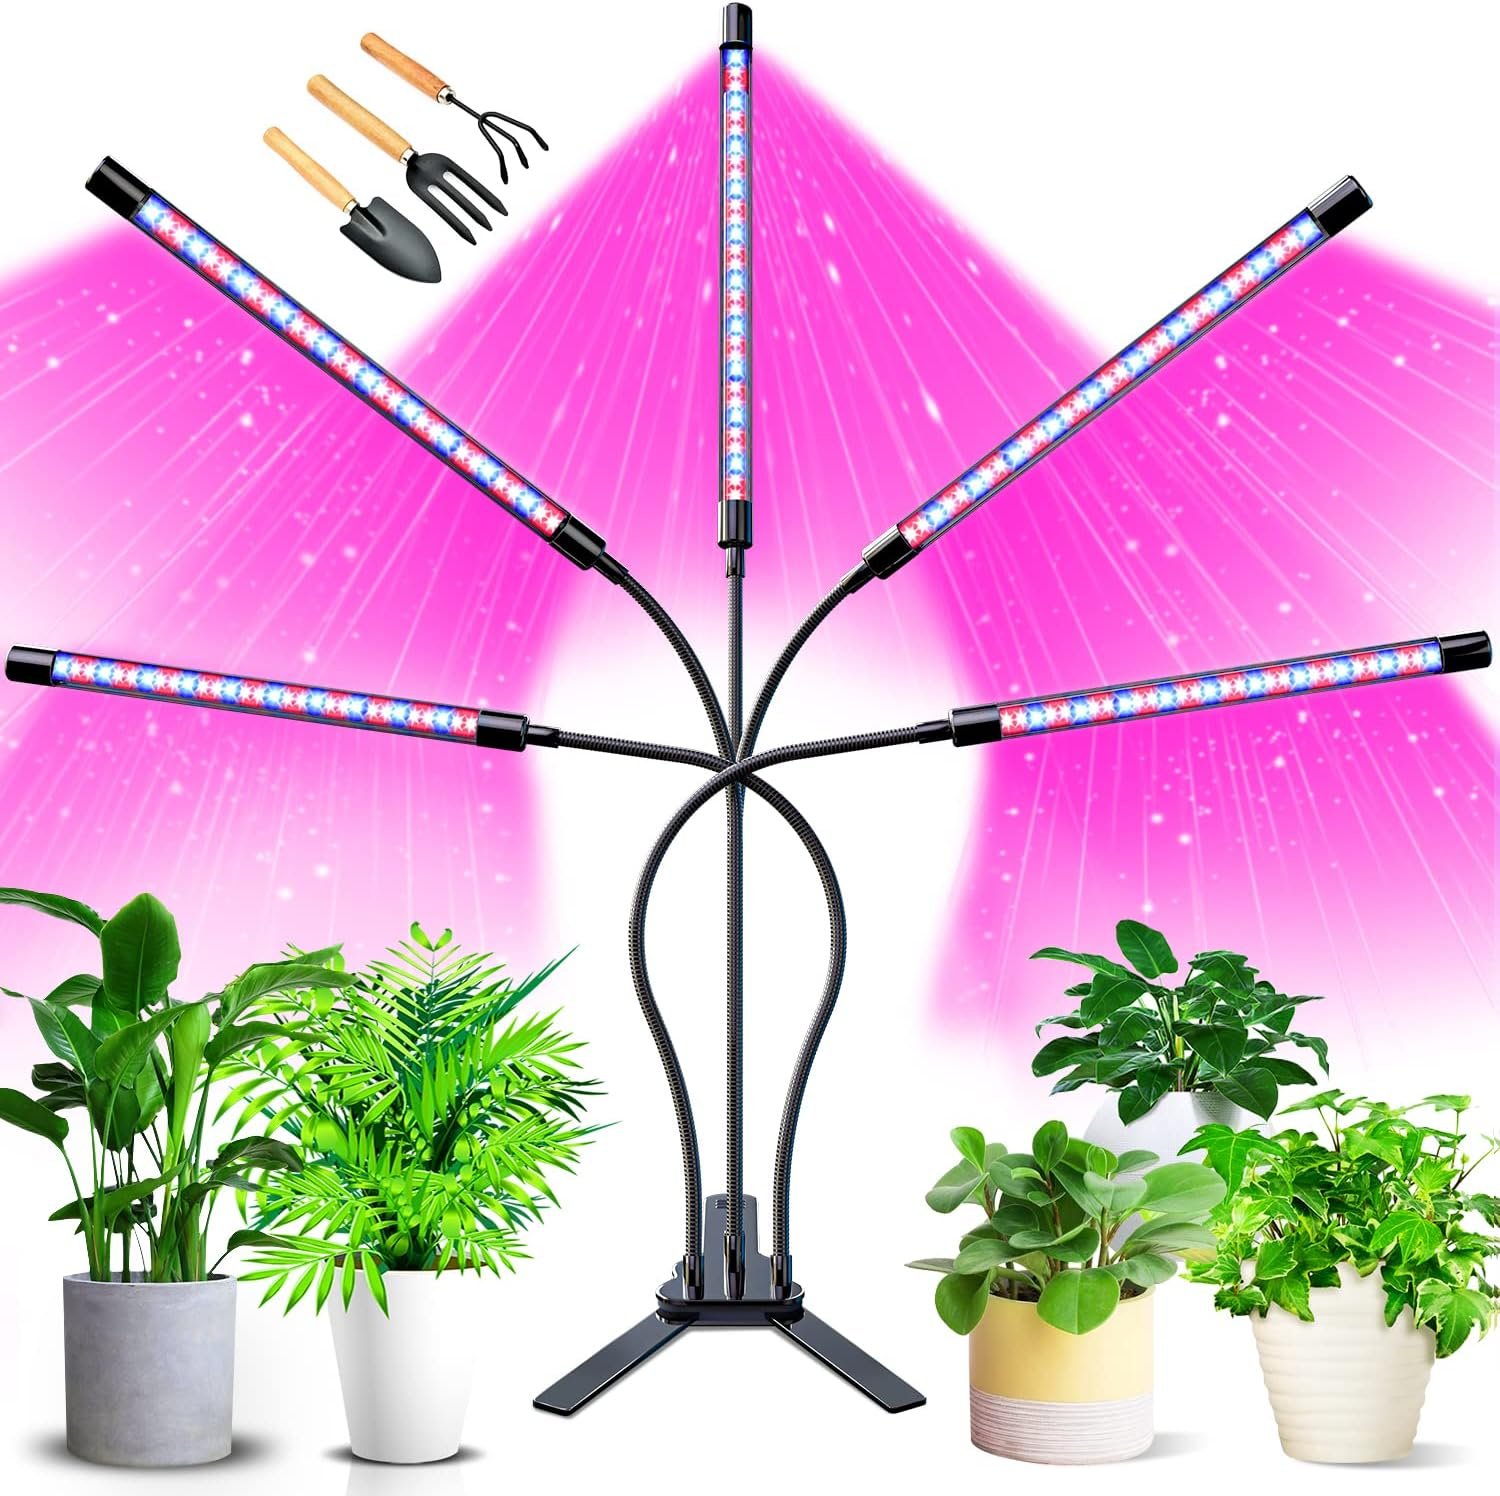 GroDrow Grow Lights for Indoor Plants, 150 LED Grow Light for Seed Starting with Red Blue Spectrum, 3/9/12H Timer, 10 Dimmable Levels  3 Switch Modes, Adjustable Gooseneck Suitable for Various Plant